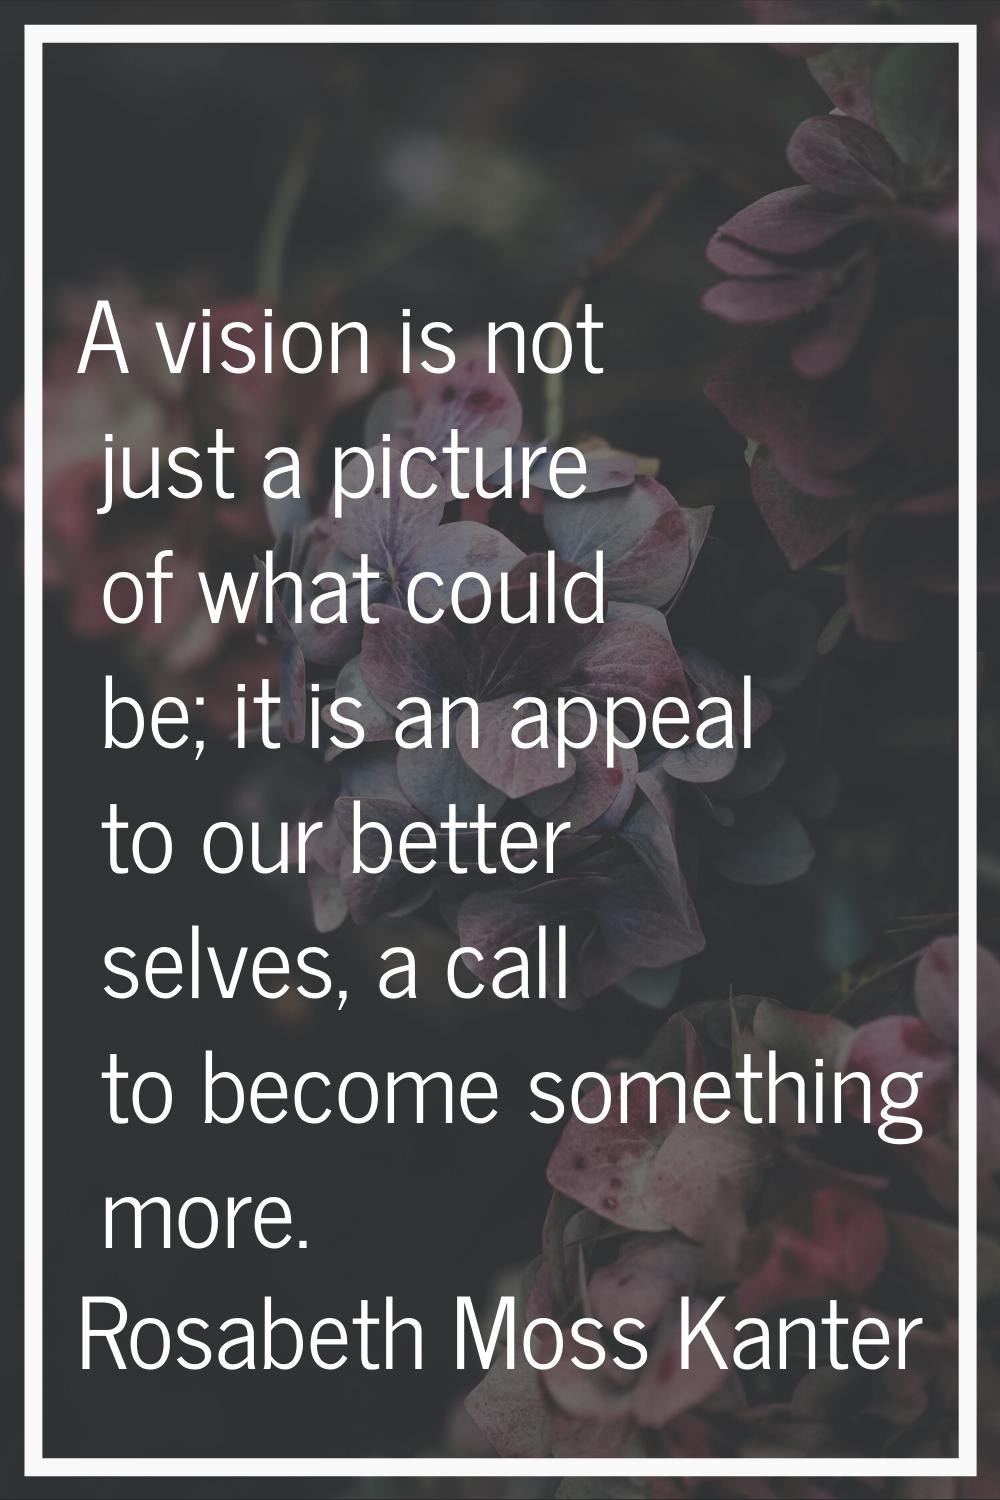 A vision is not just a picture of what could be; it is an appeal to our better selves, a call to be